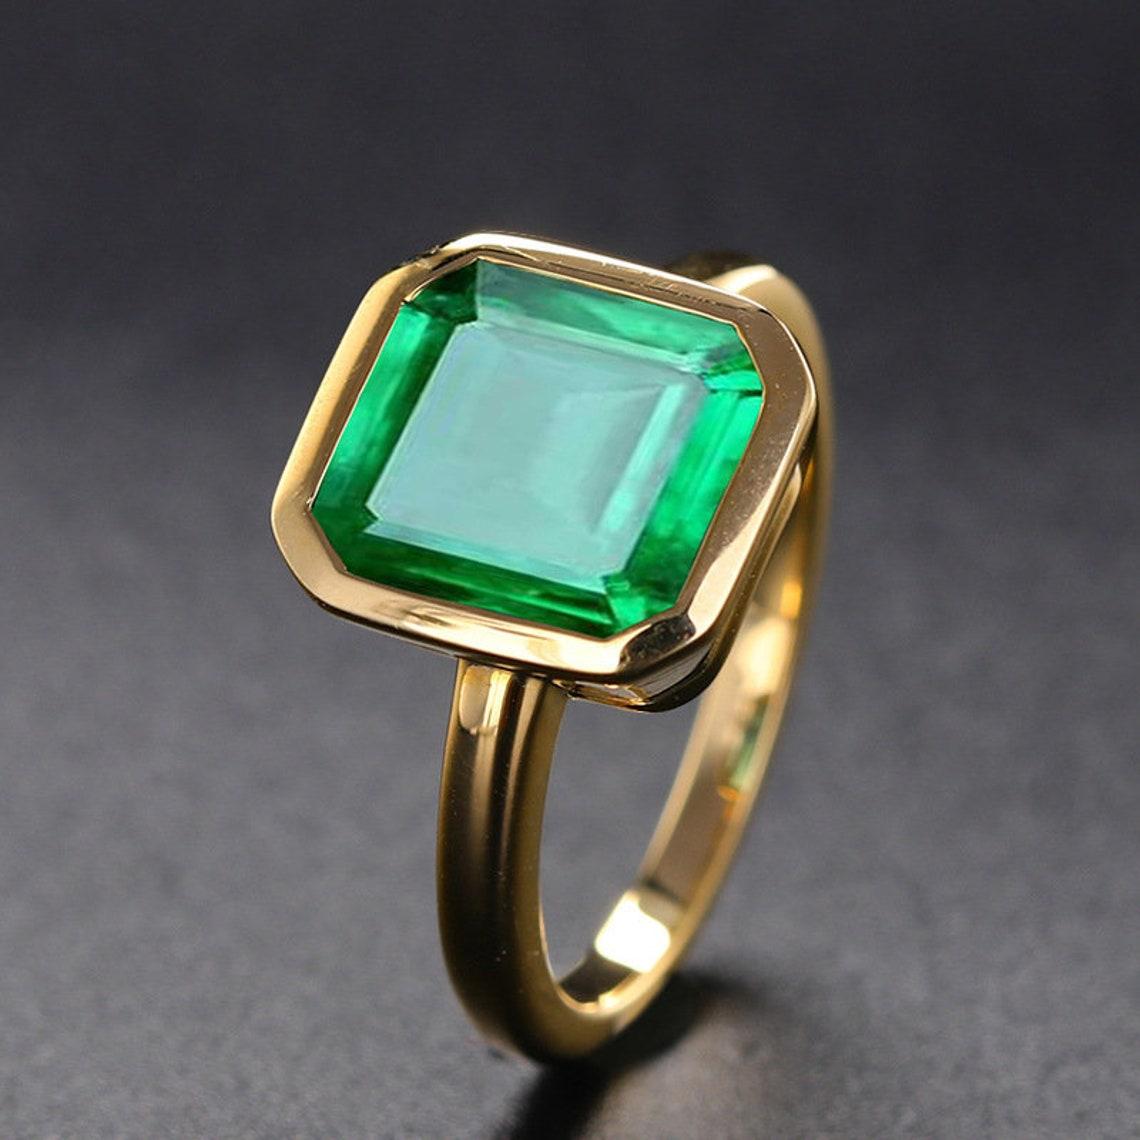 

This Green Zircon Ring 10 karat Yellow Gold  Plated looks just like a real emerald  Simple and contemporary 

You can have it in real gold if you want 

Its also very poplar  

Sizes 6 to 9  USA
UK L1/2 to P1/2